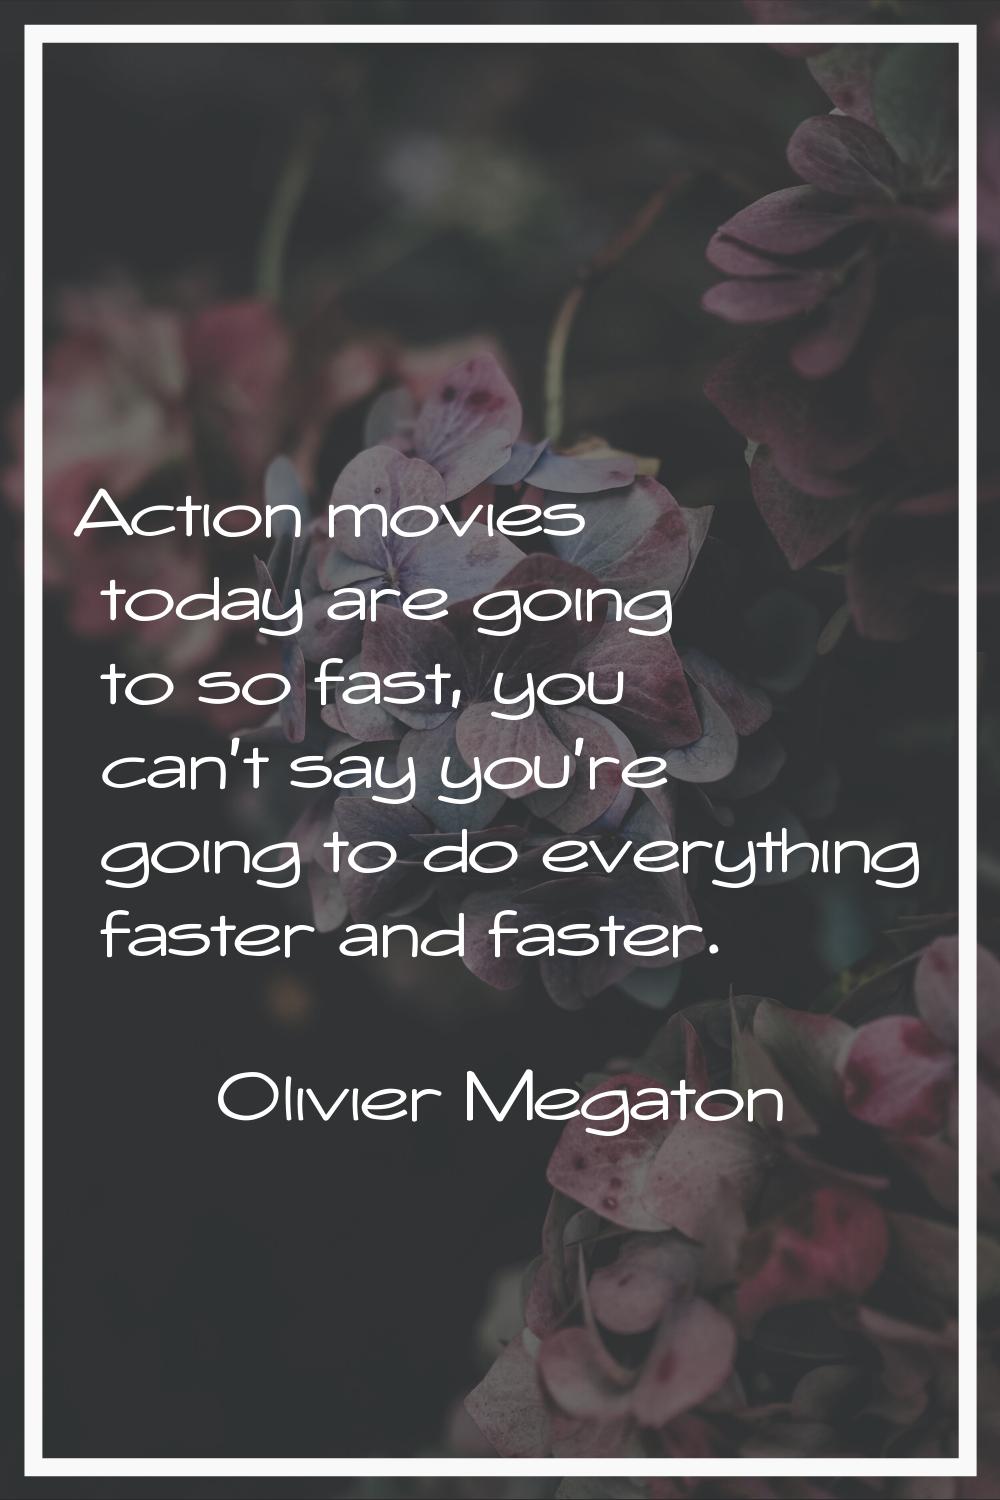 Action movies today are going to so fast, you can't say you're going to do everything faster and fa